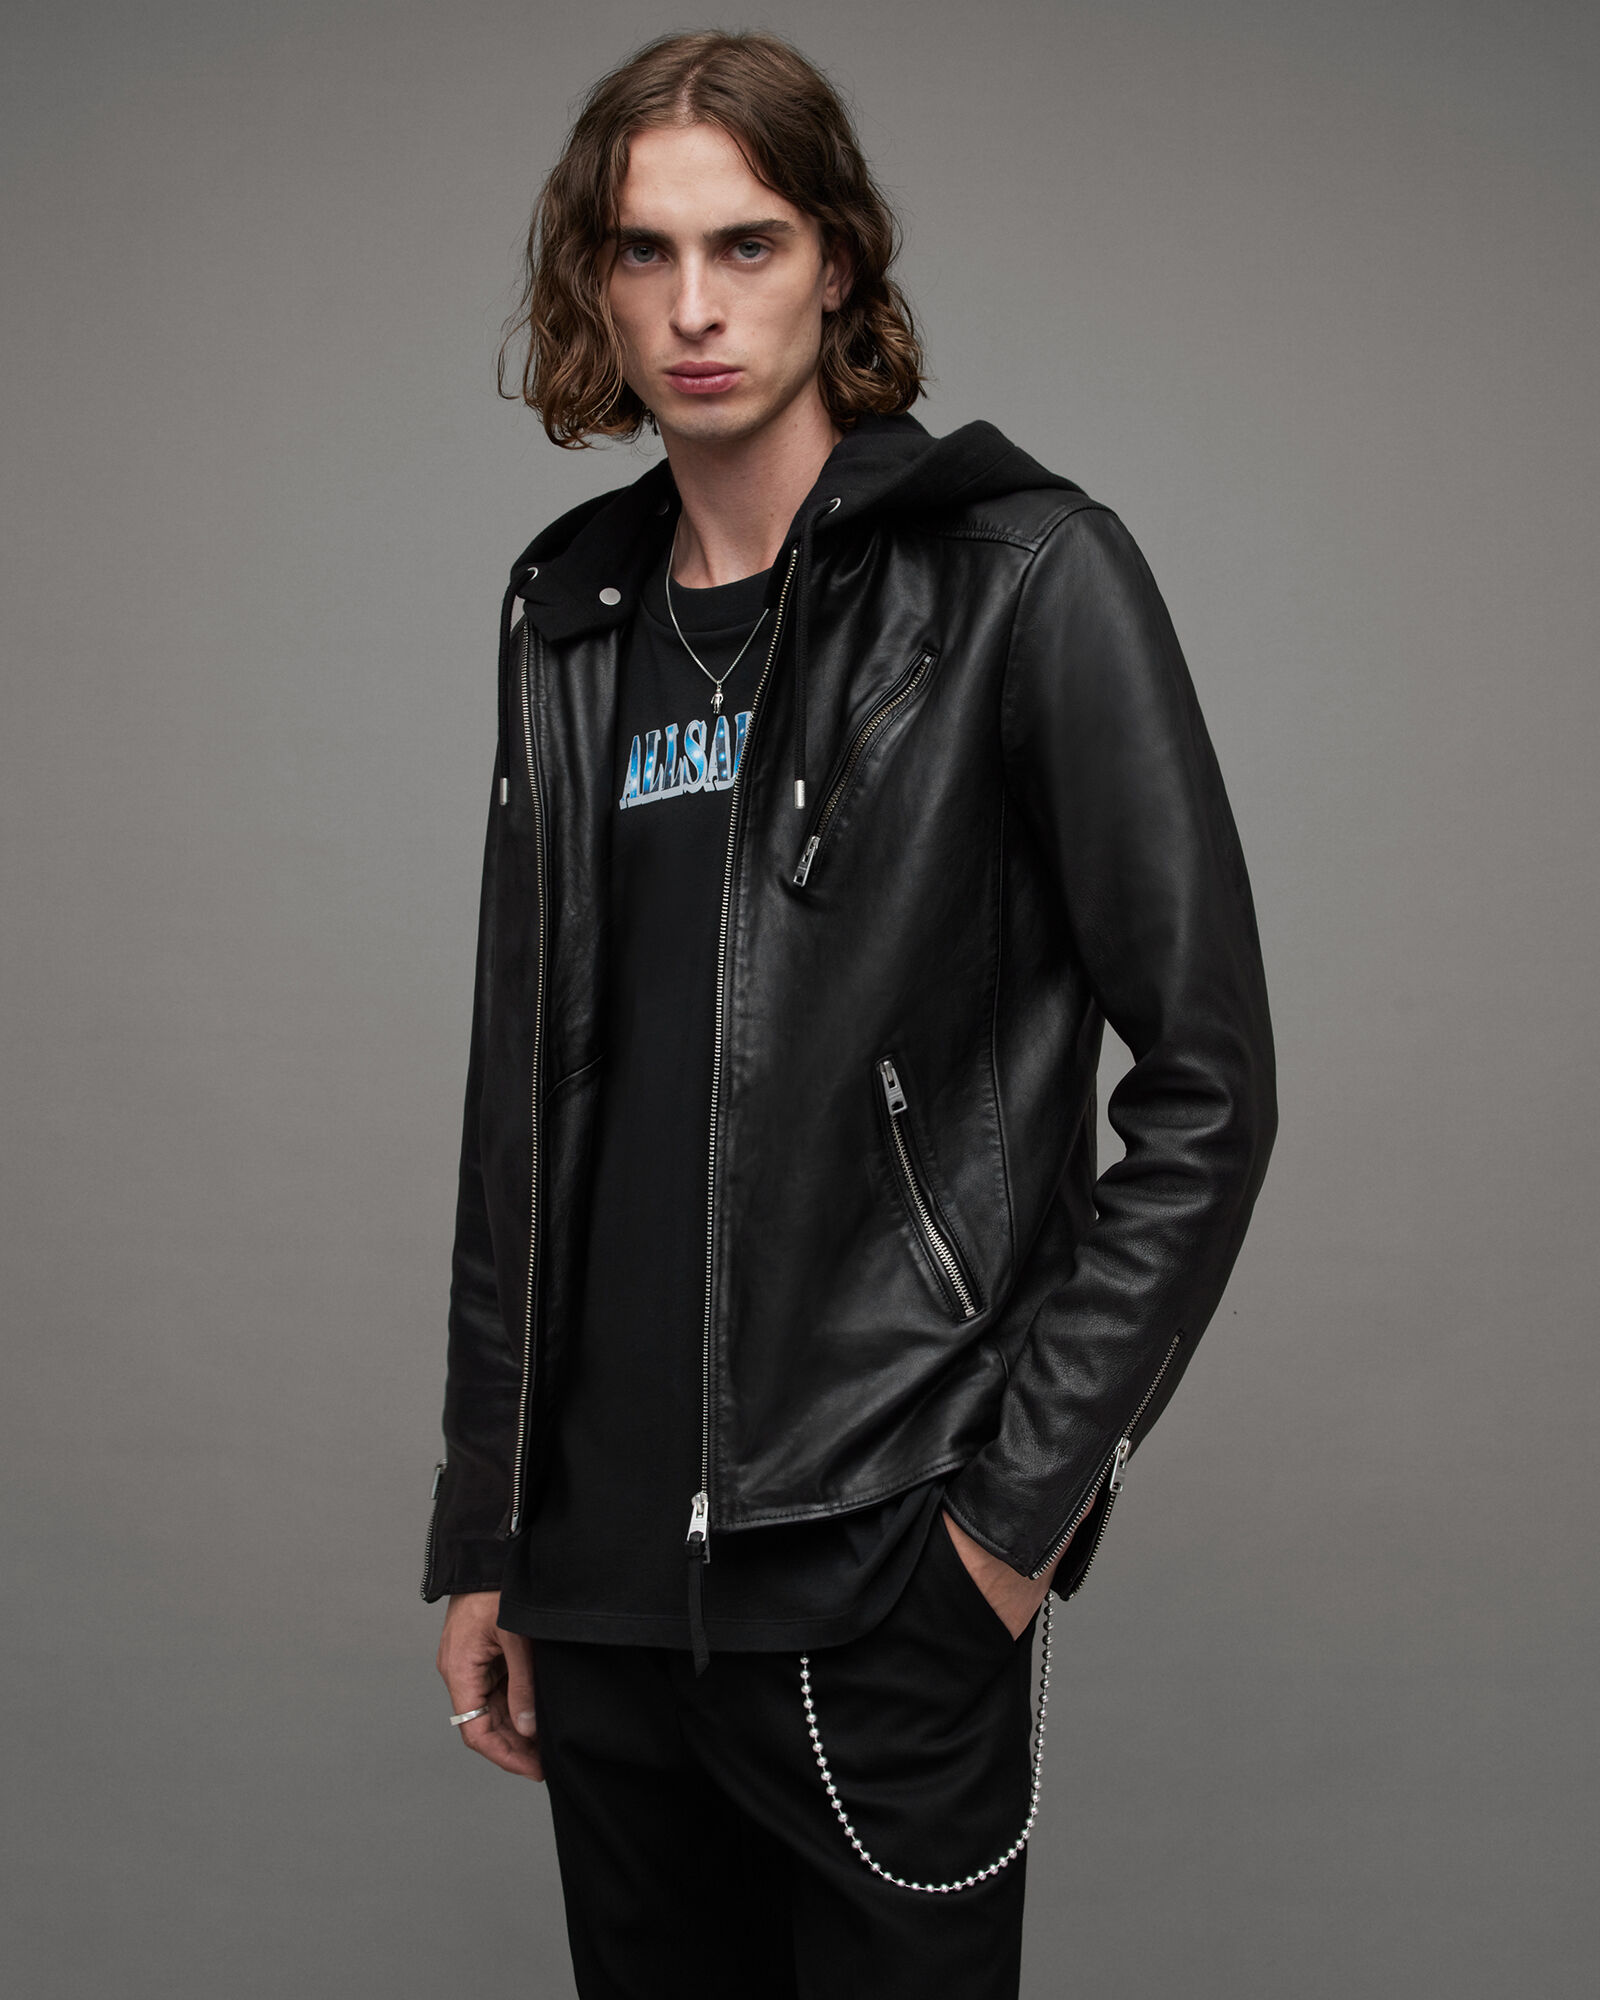 What To Know Before You Buy An Allsaints Leather Jacket – FORD LA FEMME